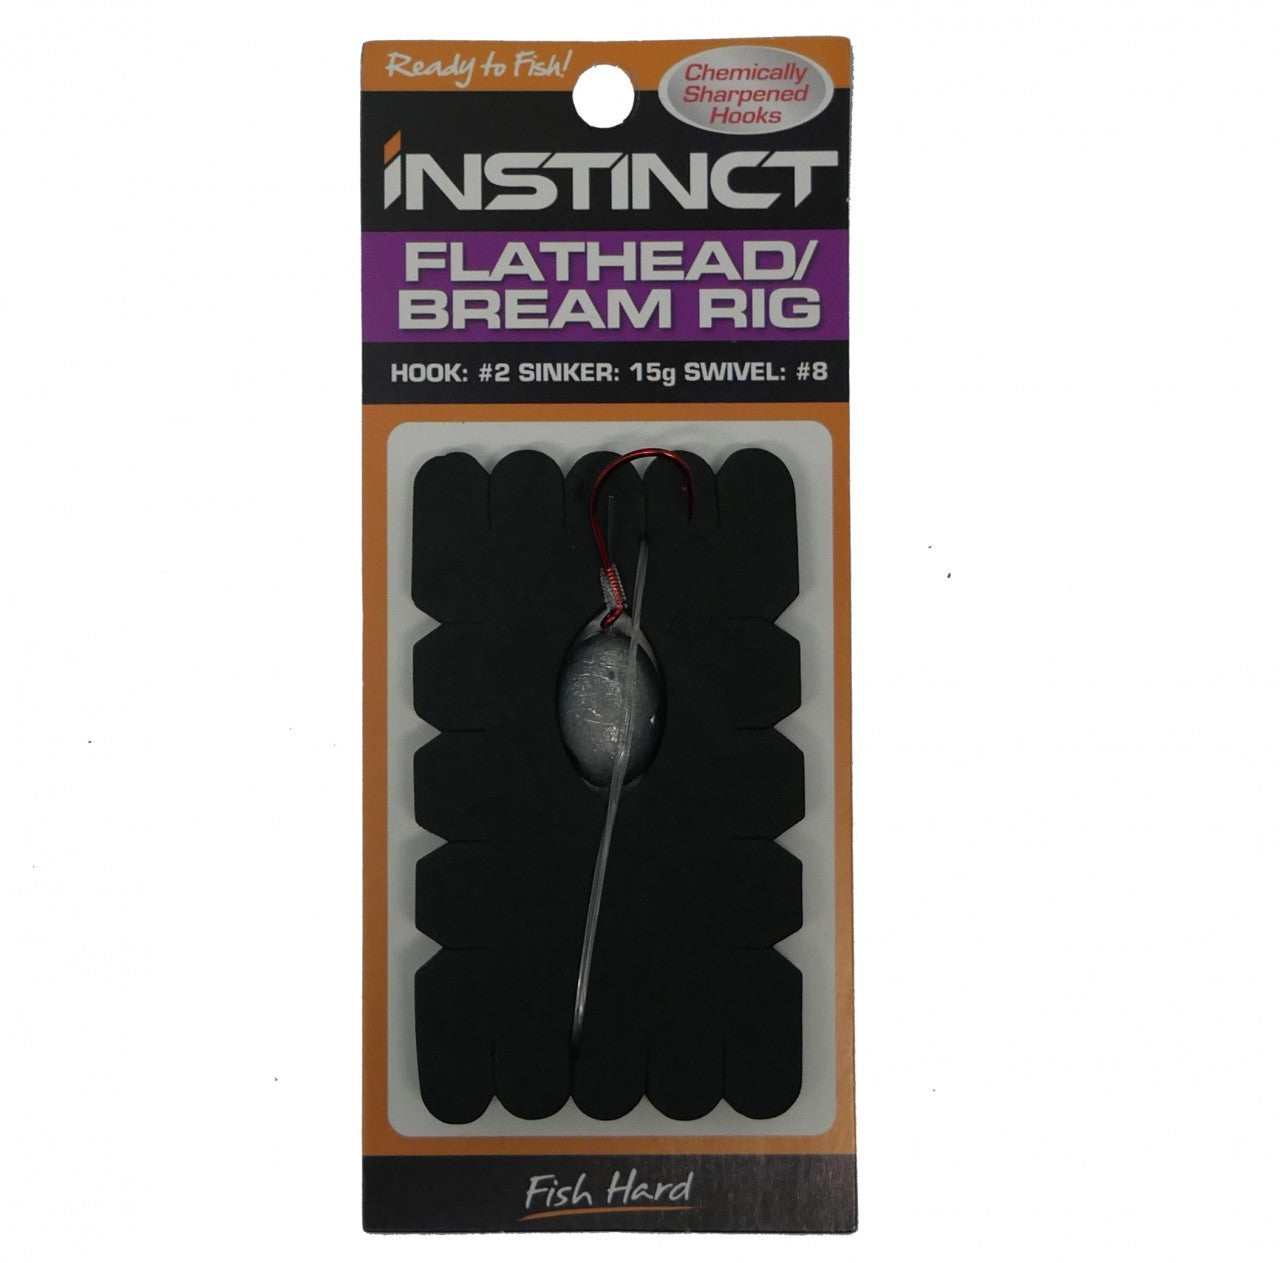 Instinct IN030 Pre Tied Flathead and Bream Fishing Rig